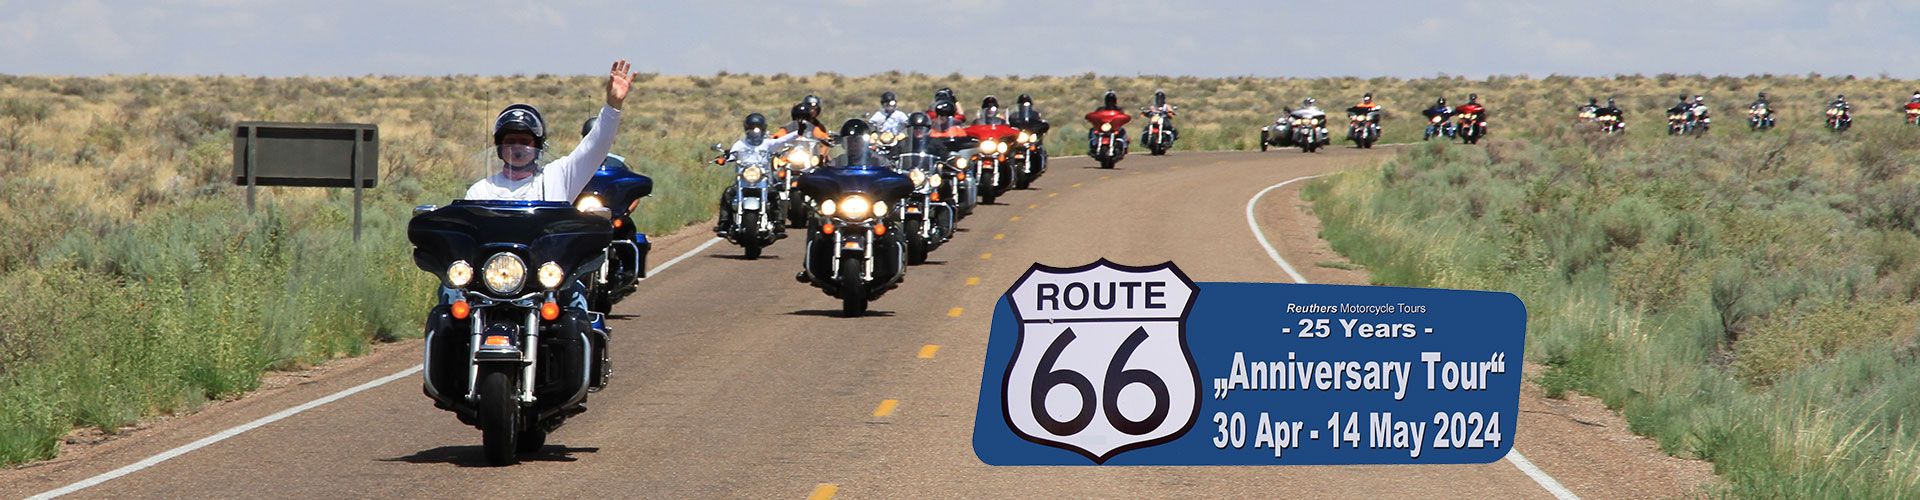 Reuthers 25 Years Route 66 Anniversary Tour